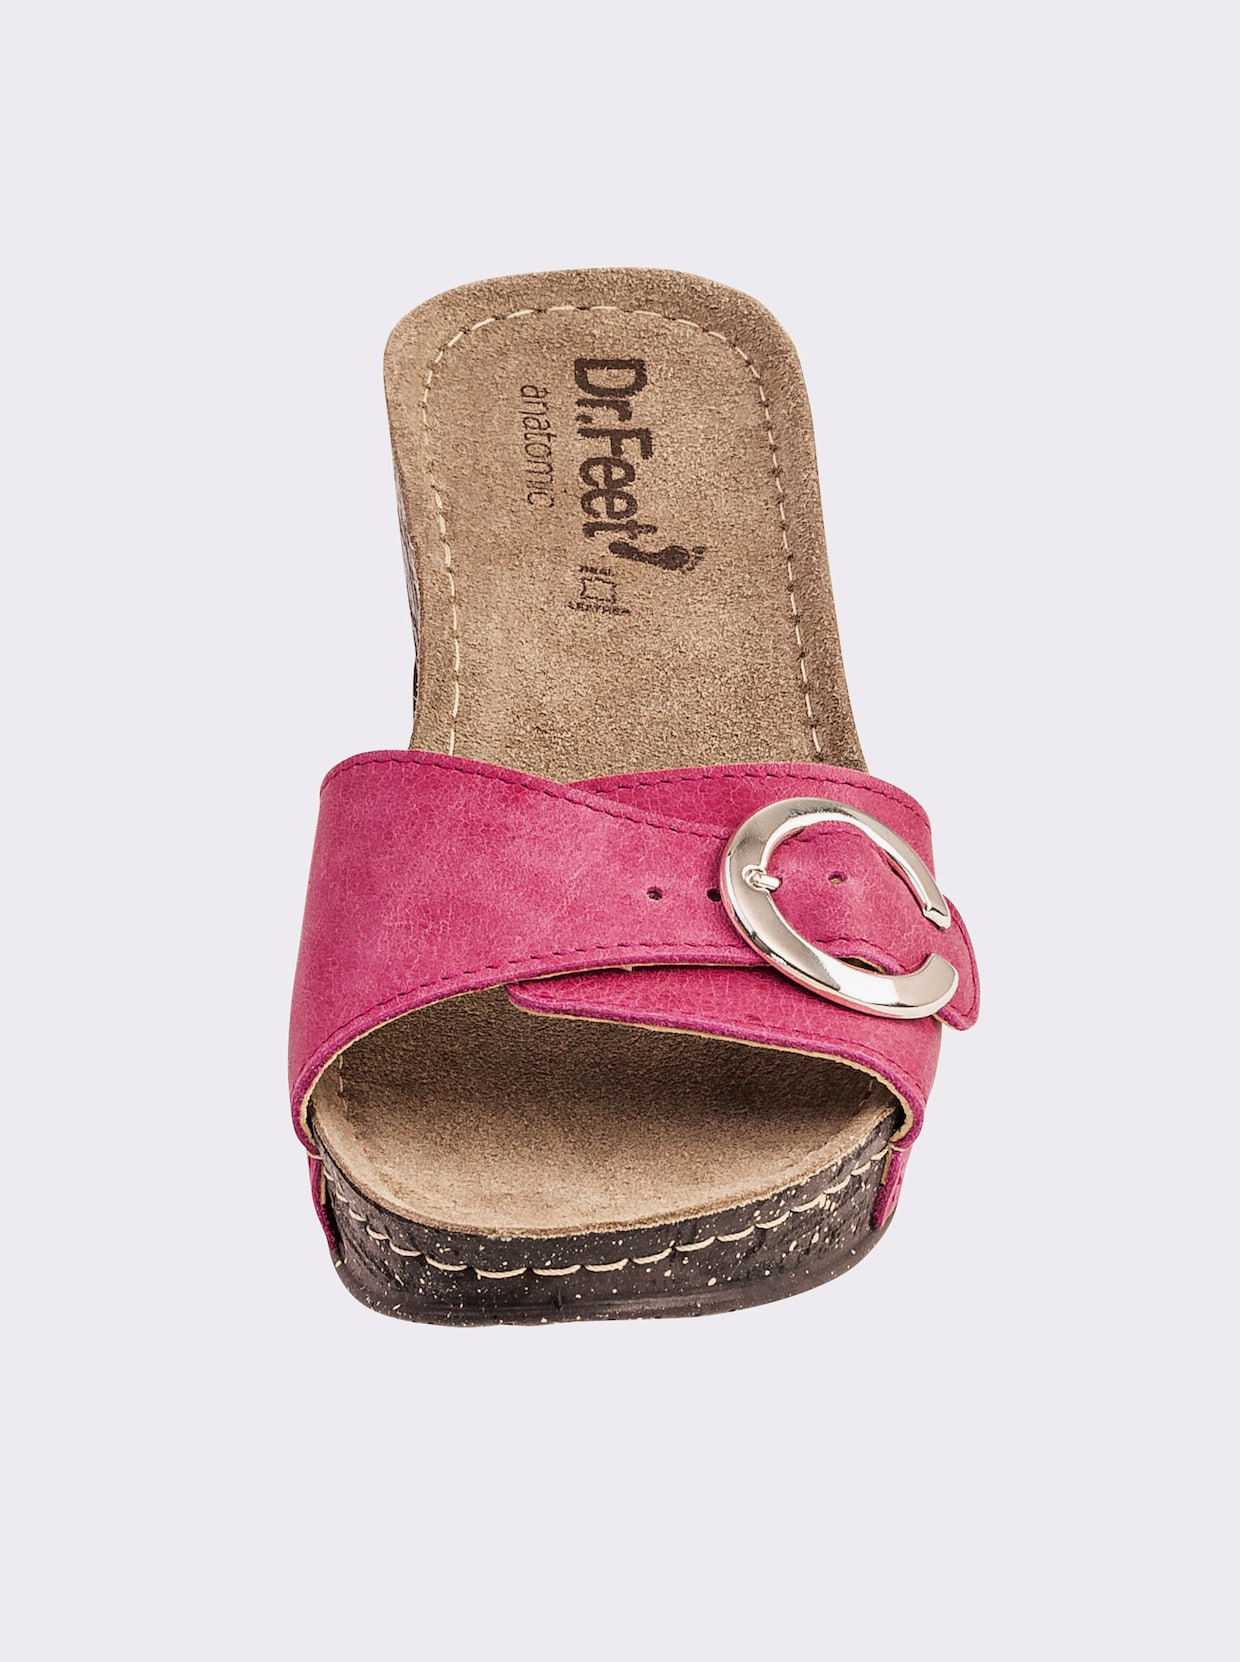 Dr. Feet slippers - pink